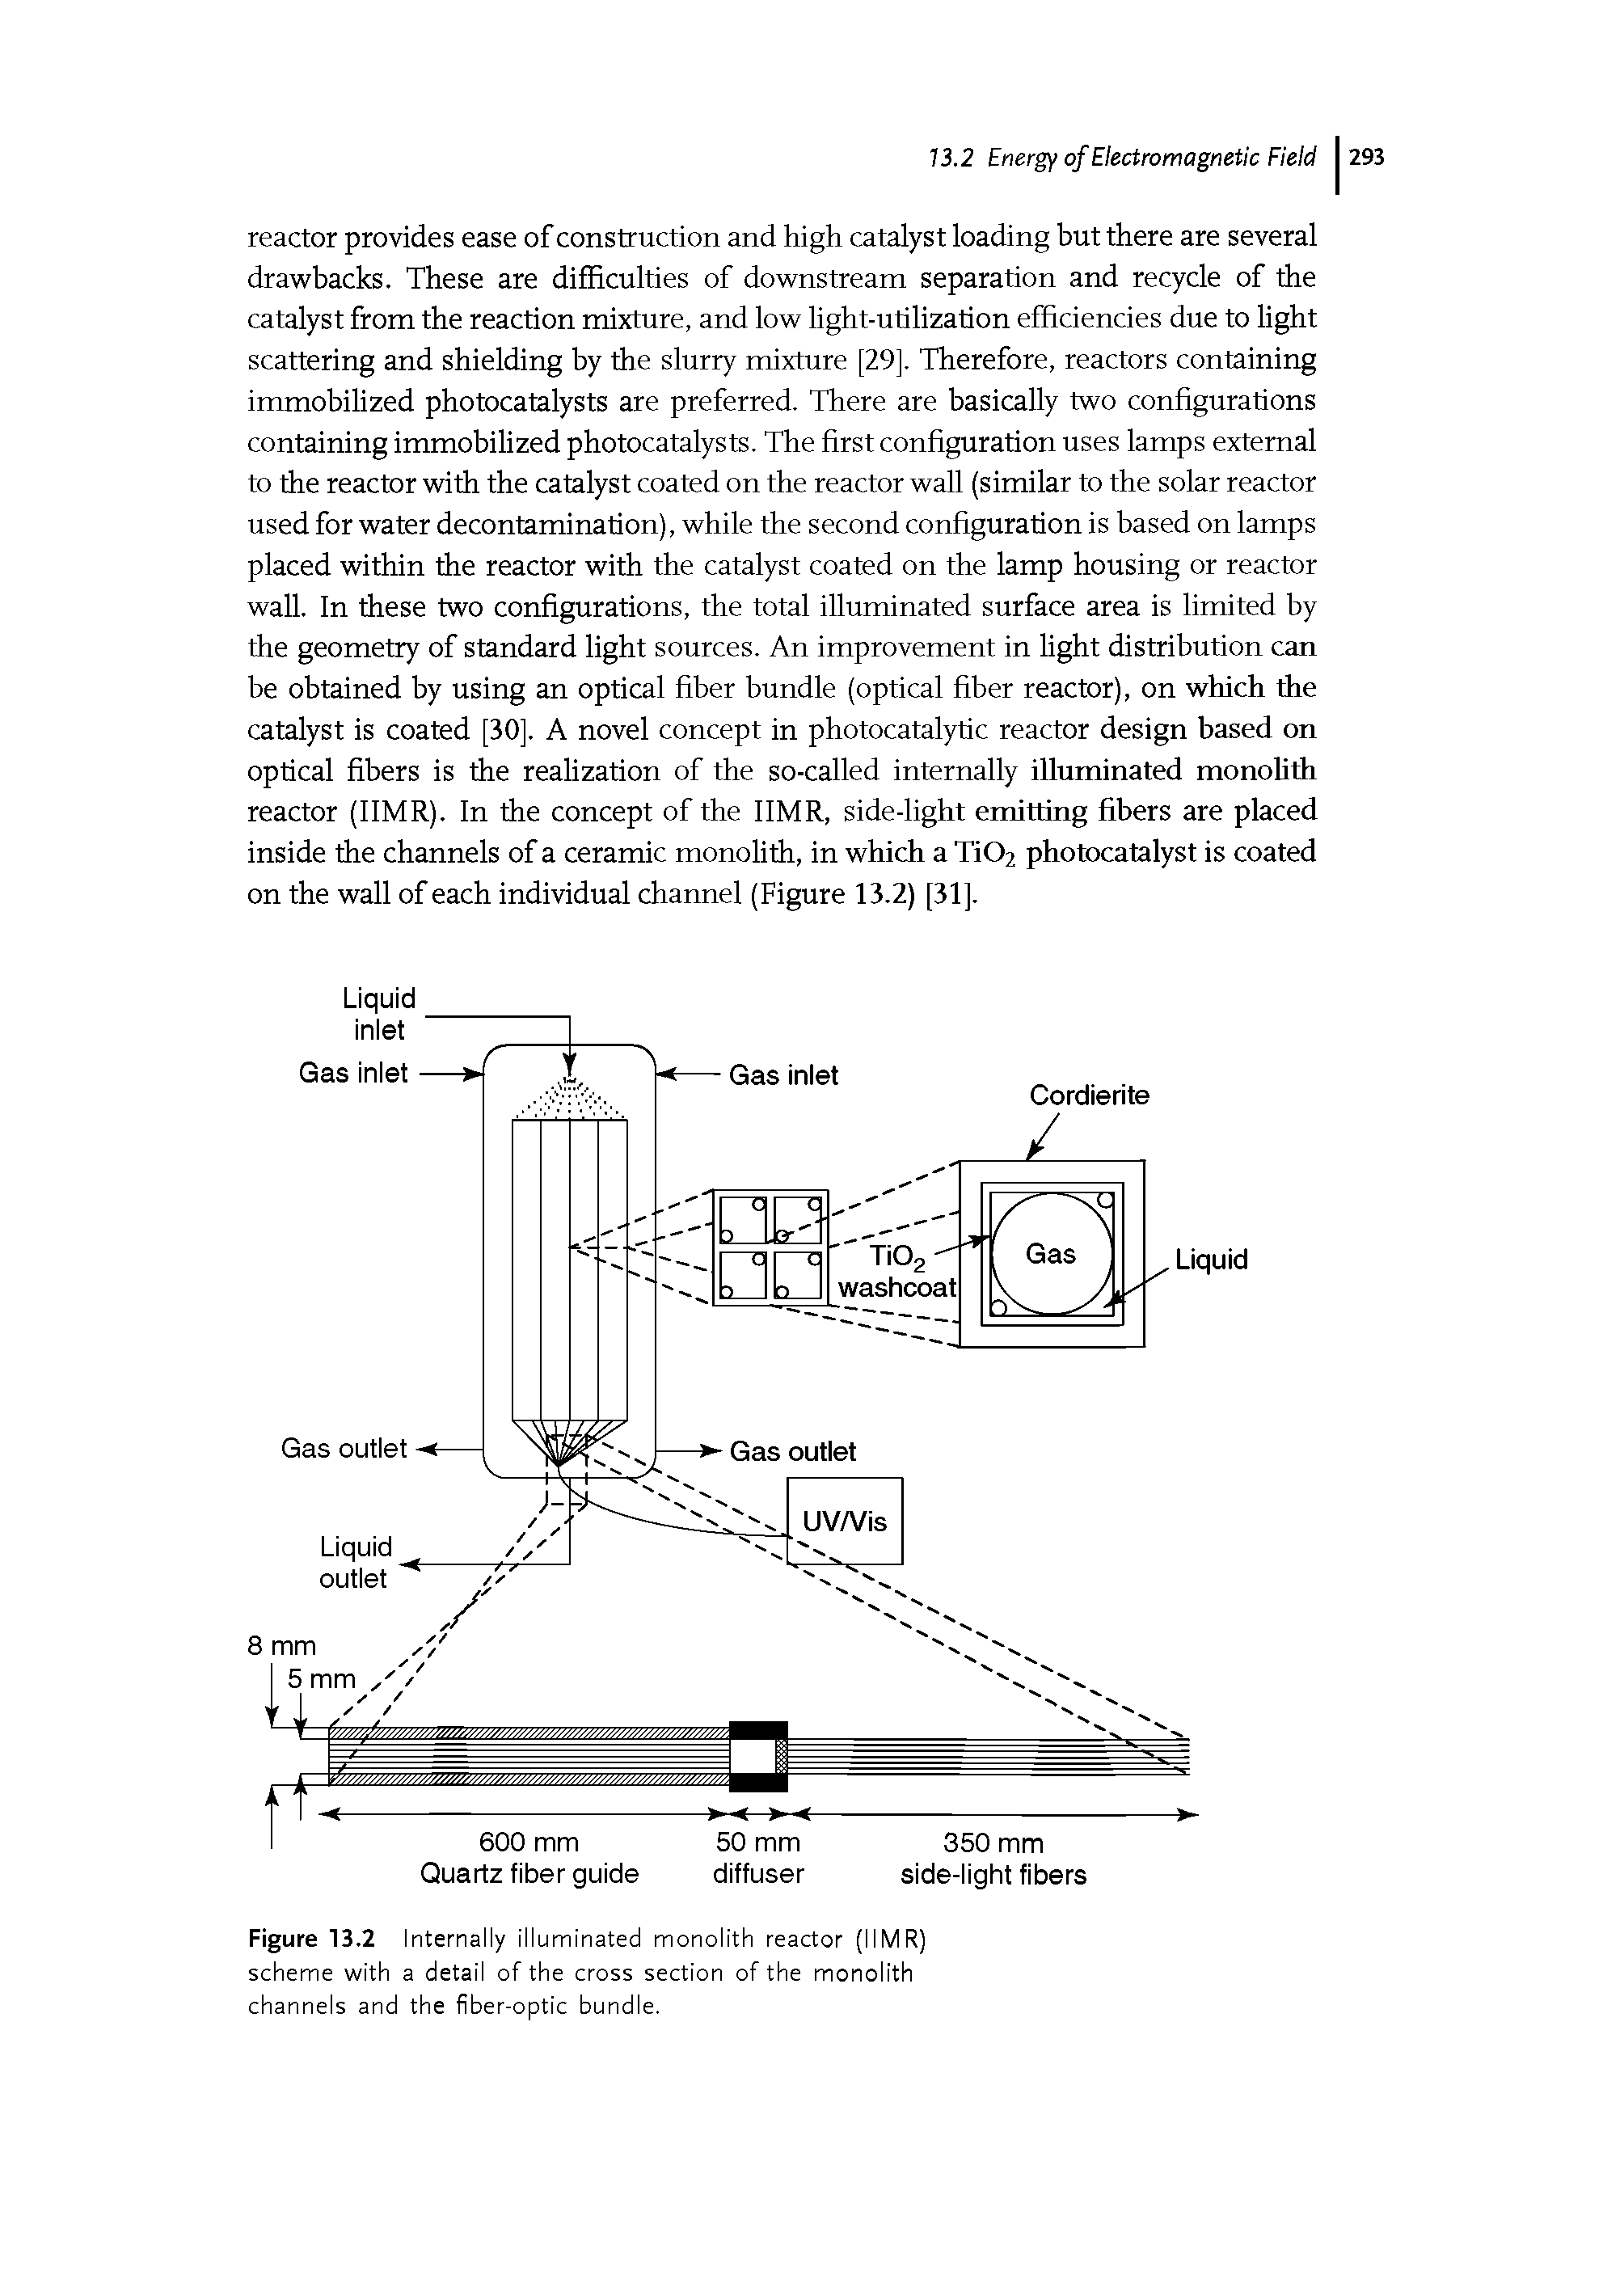 Figure 13.2 Internally illuminated monolith reactor (IIMR) scheme with a detail of the cross section of the monolith channels and the fiber-optic bundle.